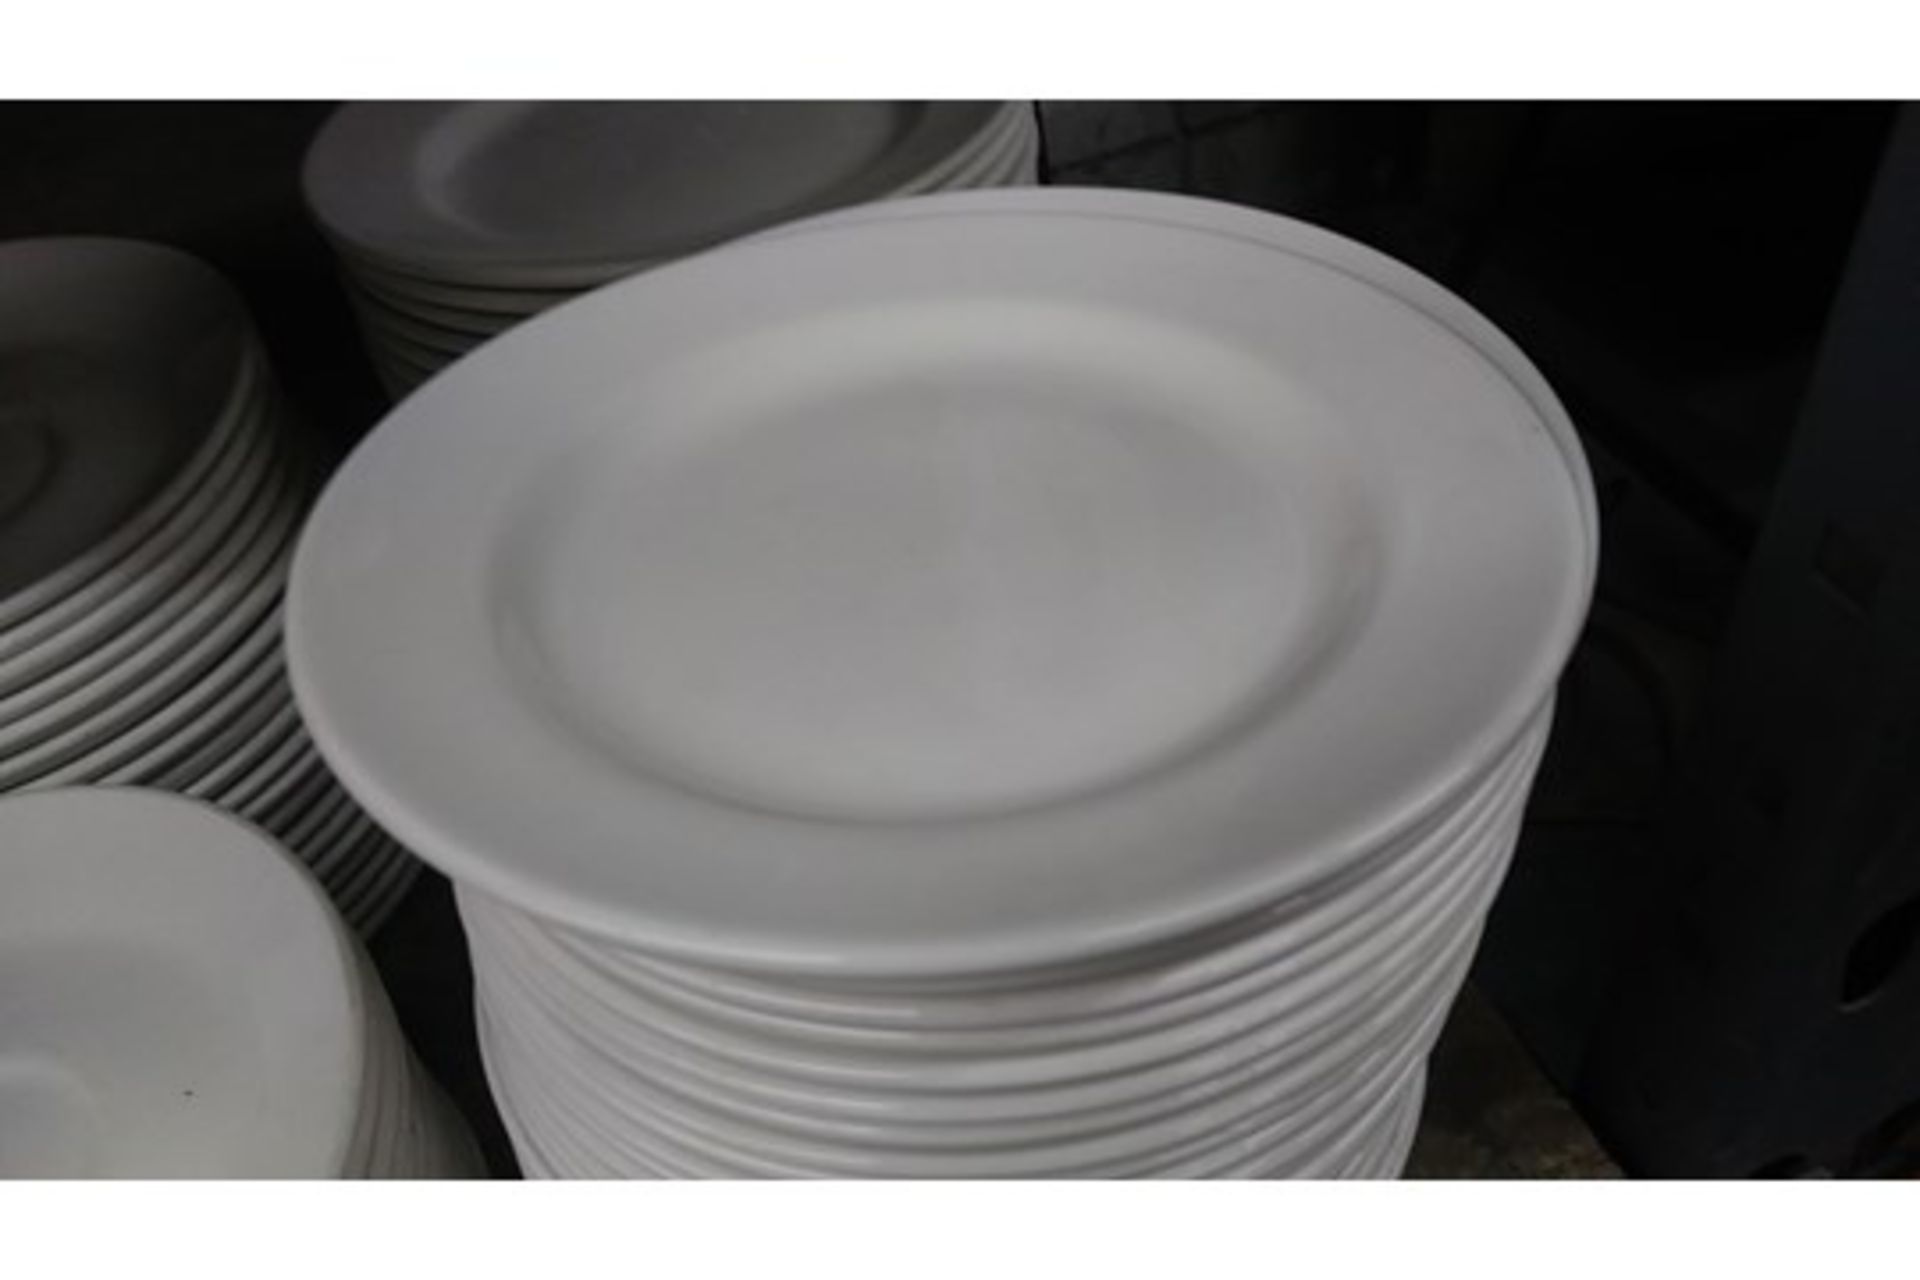 6.5" STEELITE PLATE (includes approx QTY 92 in this lot)